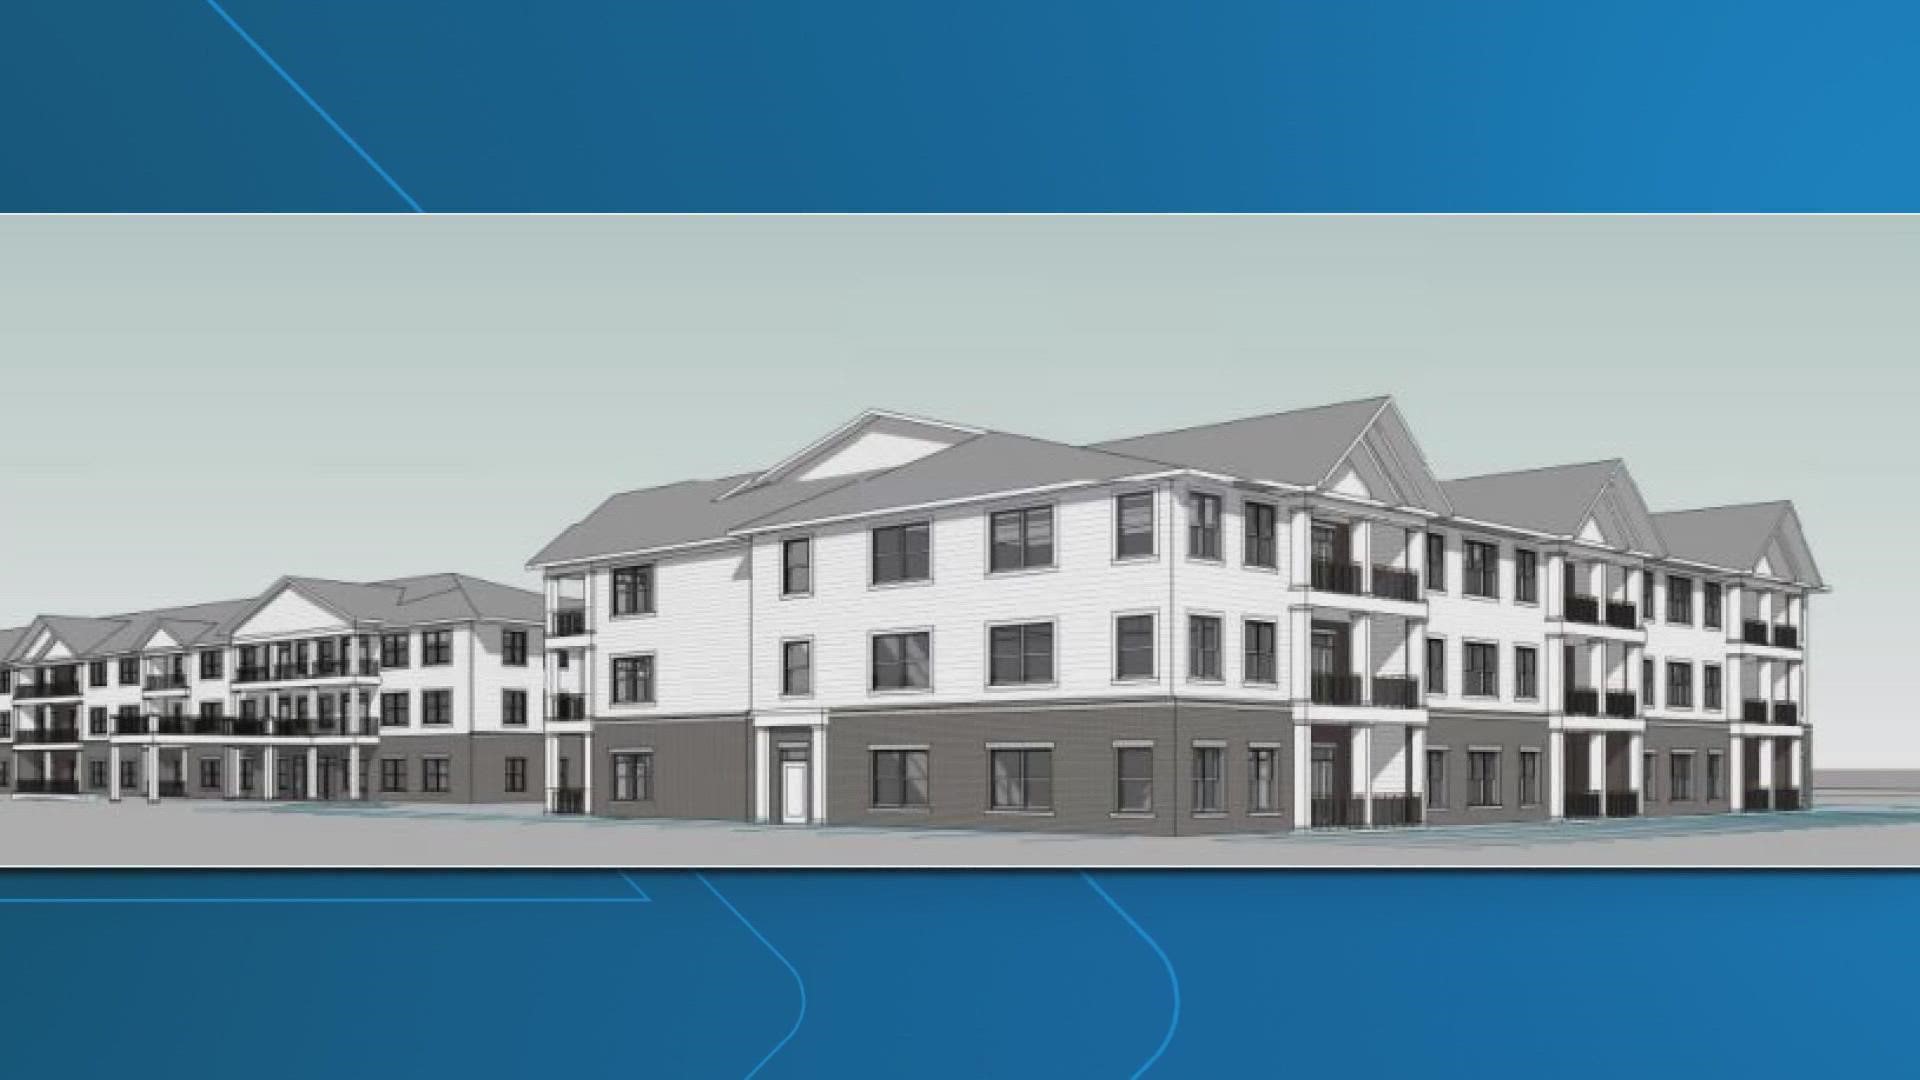 The 178-unit development would be built off River Road past the Gene Snyder.